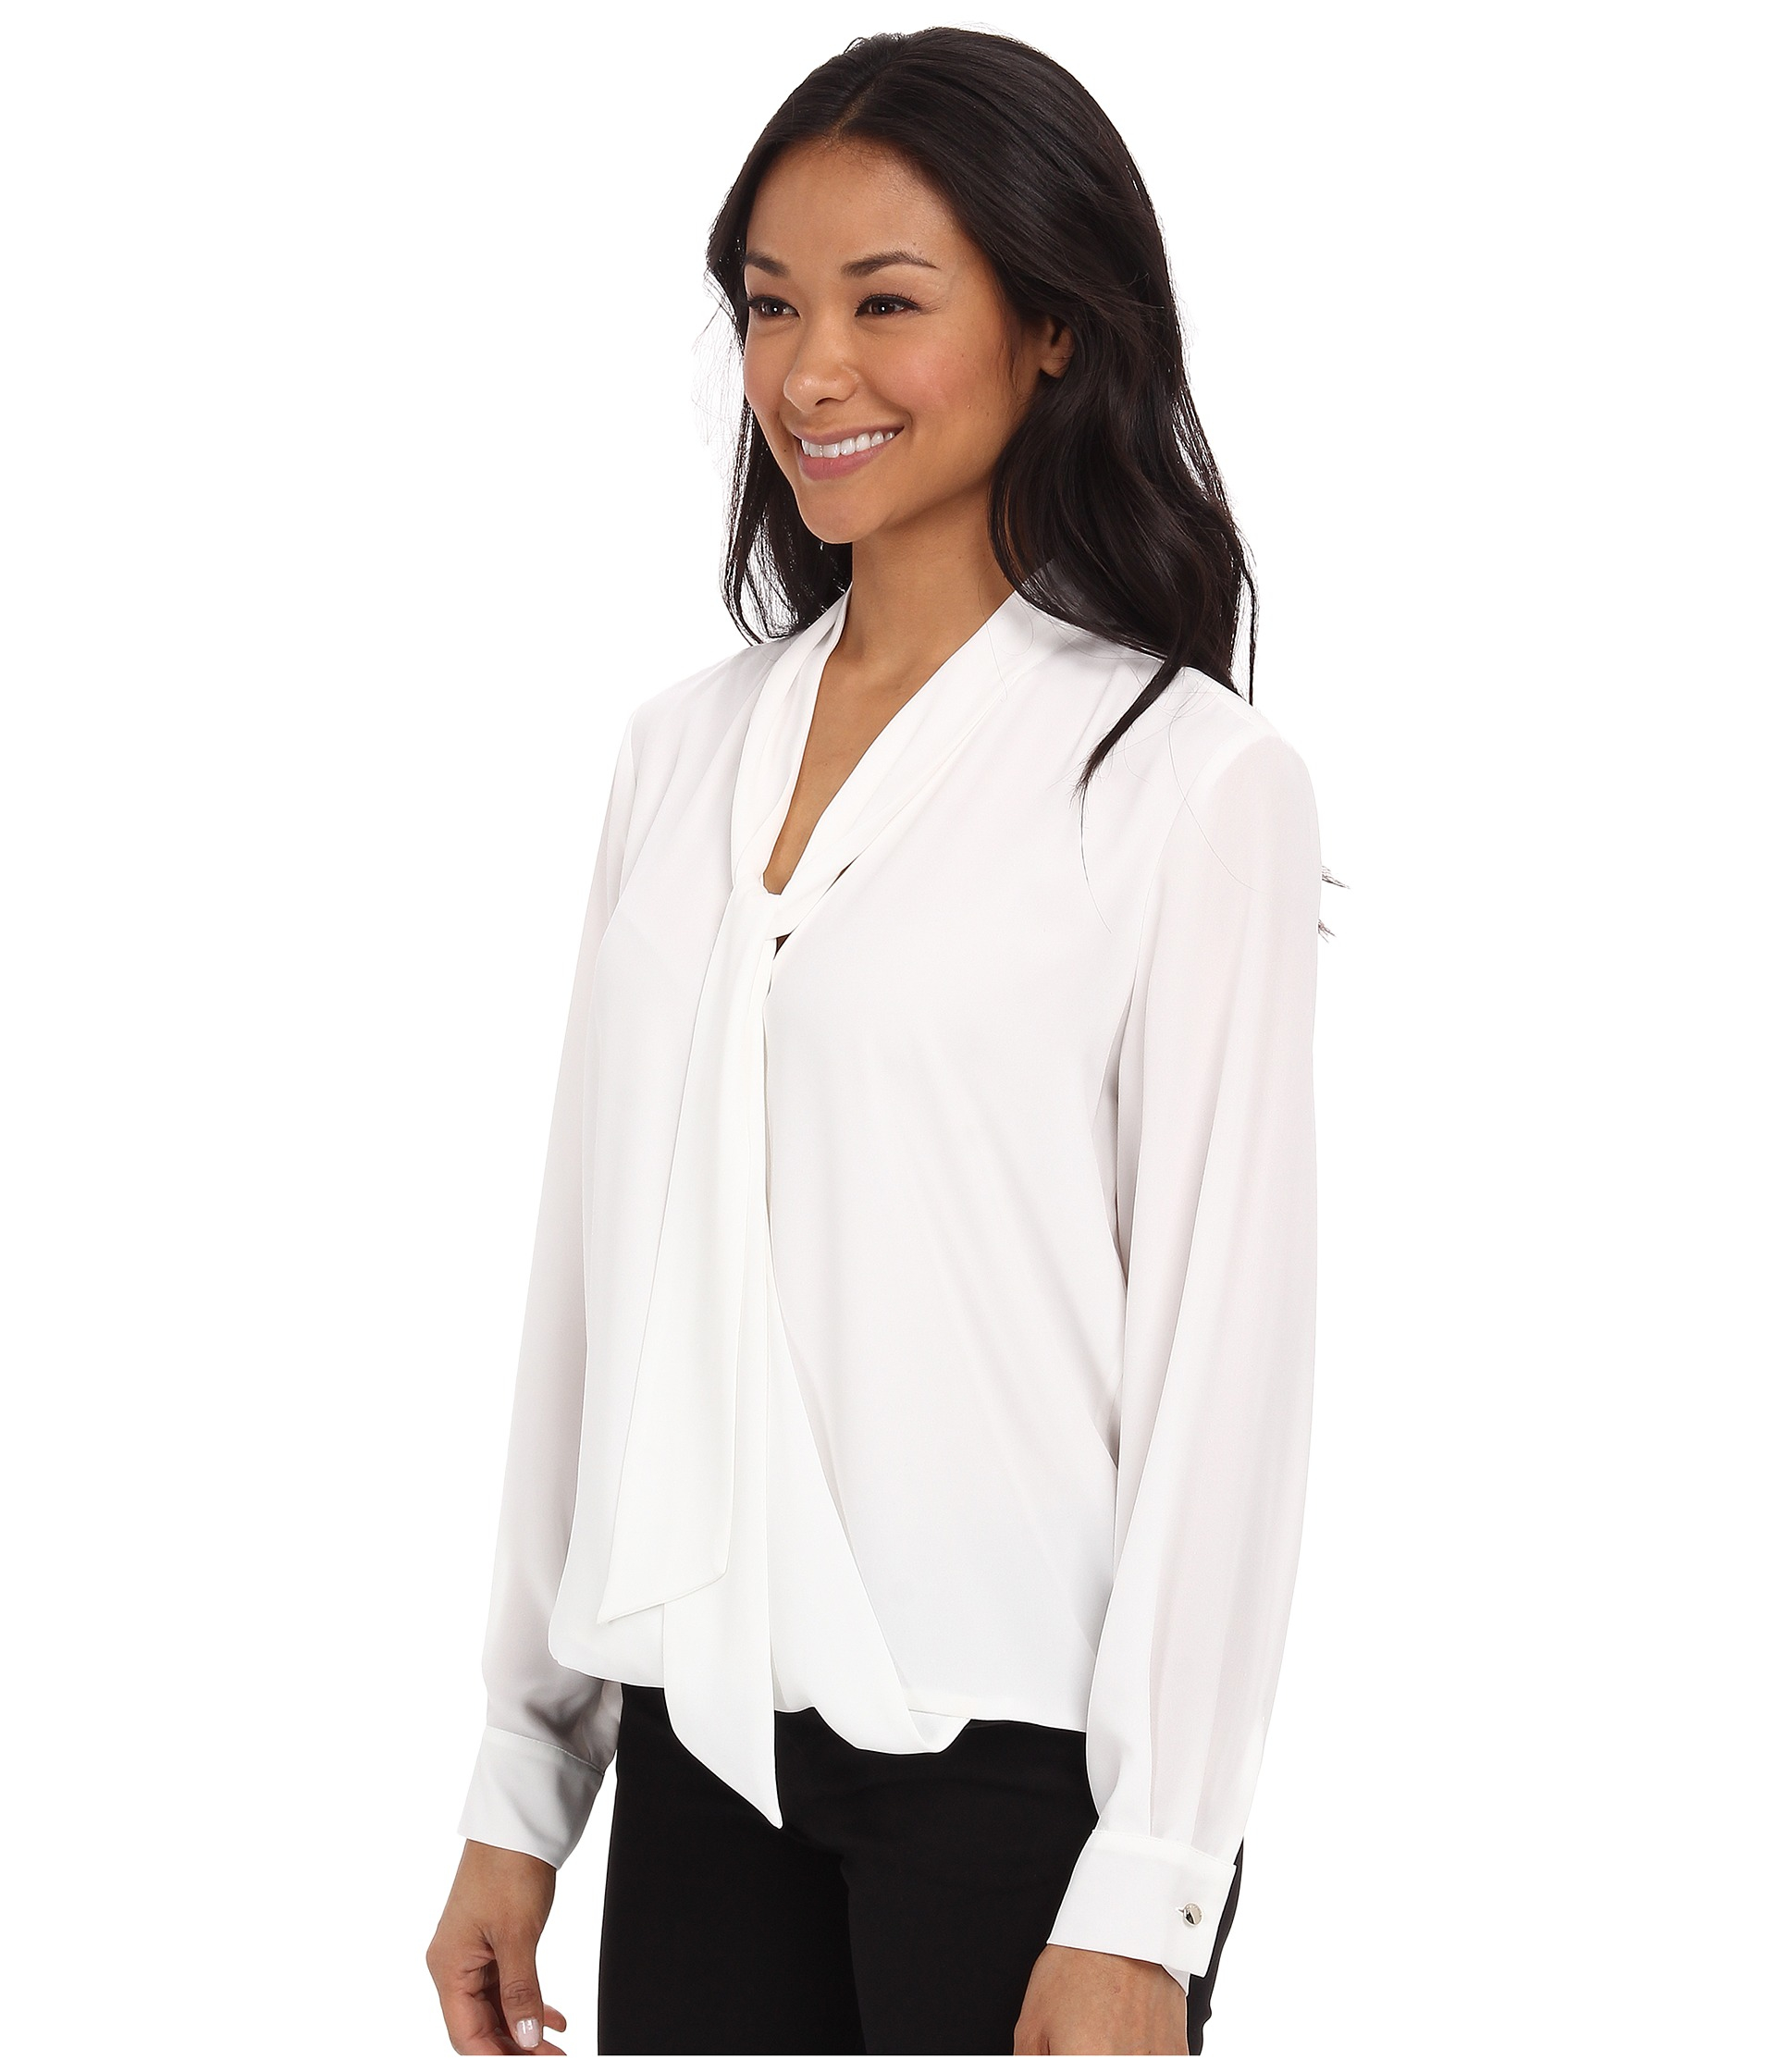 Lyst - Vince Camuto Tie Neck Wrap Blouse in White